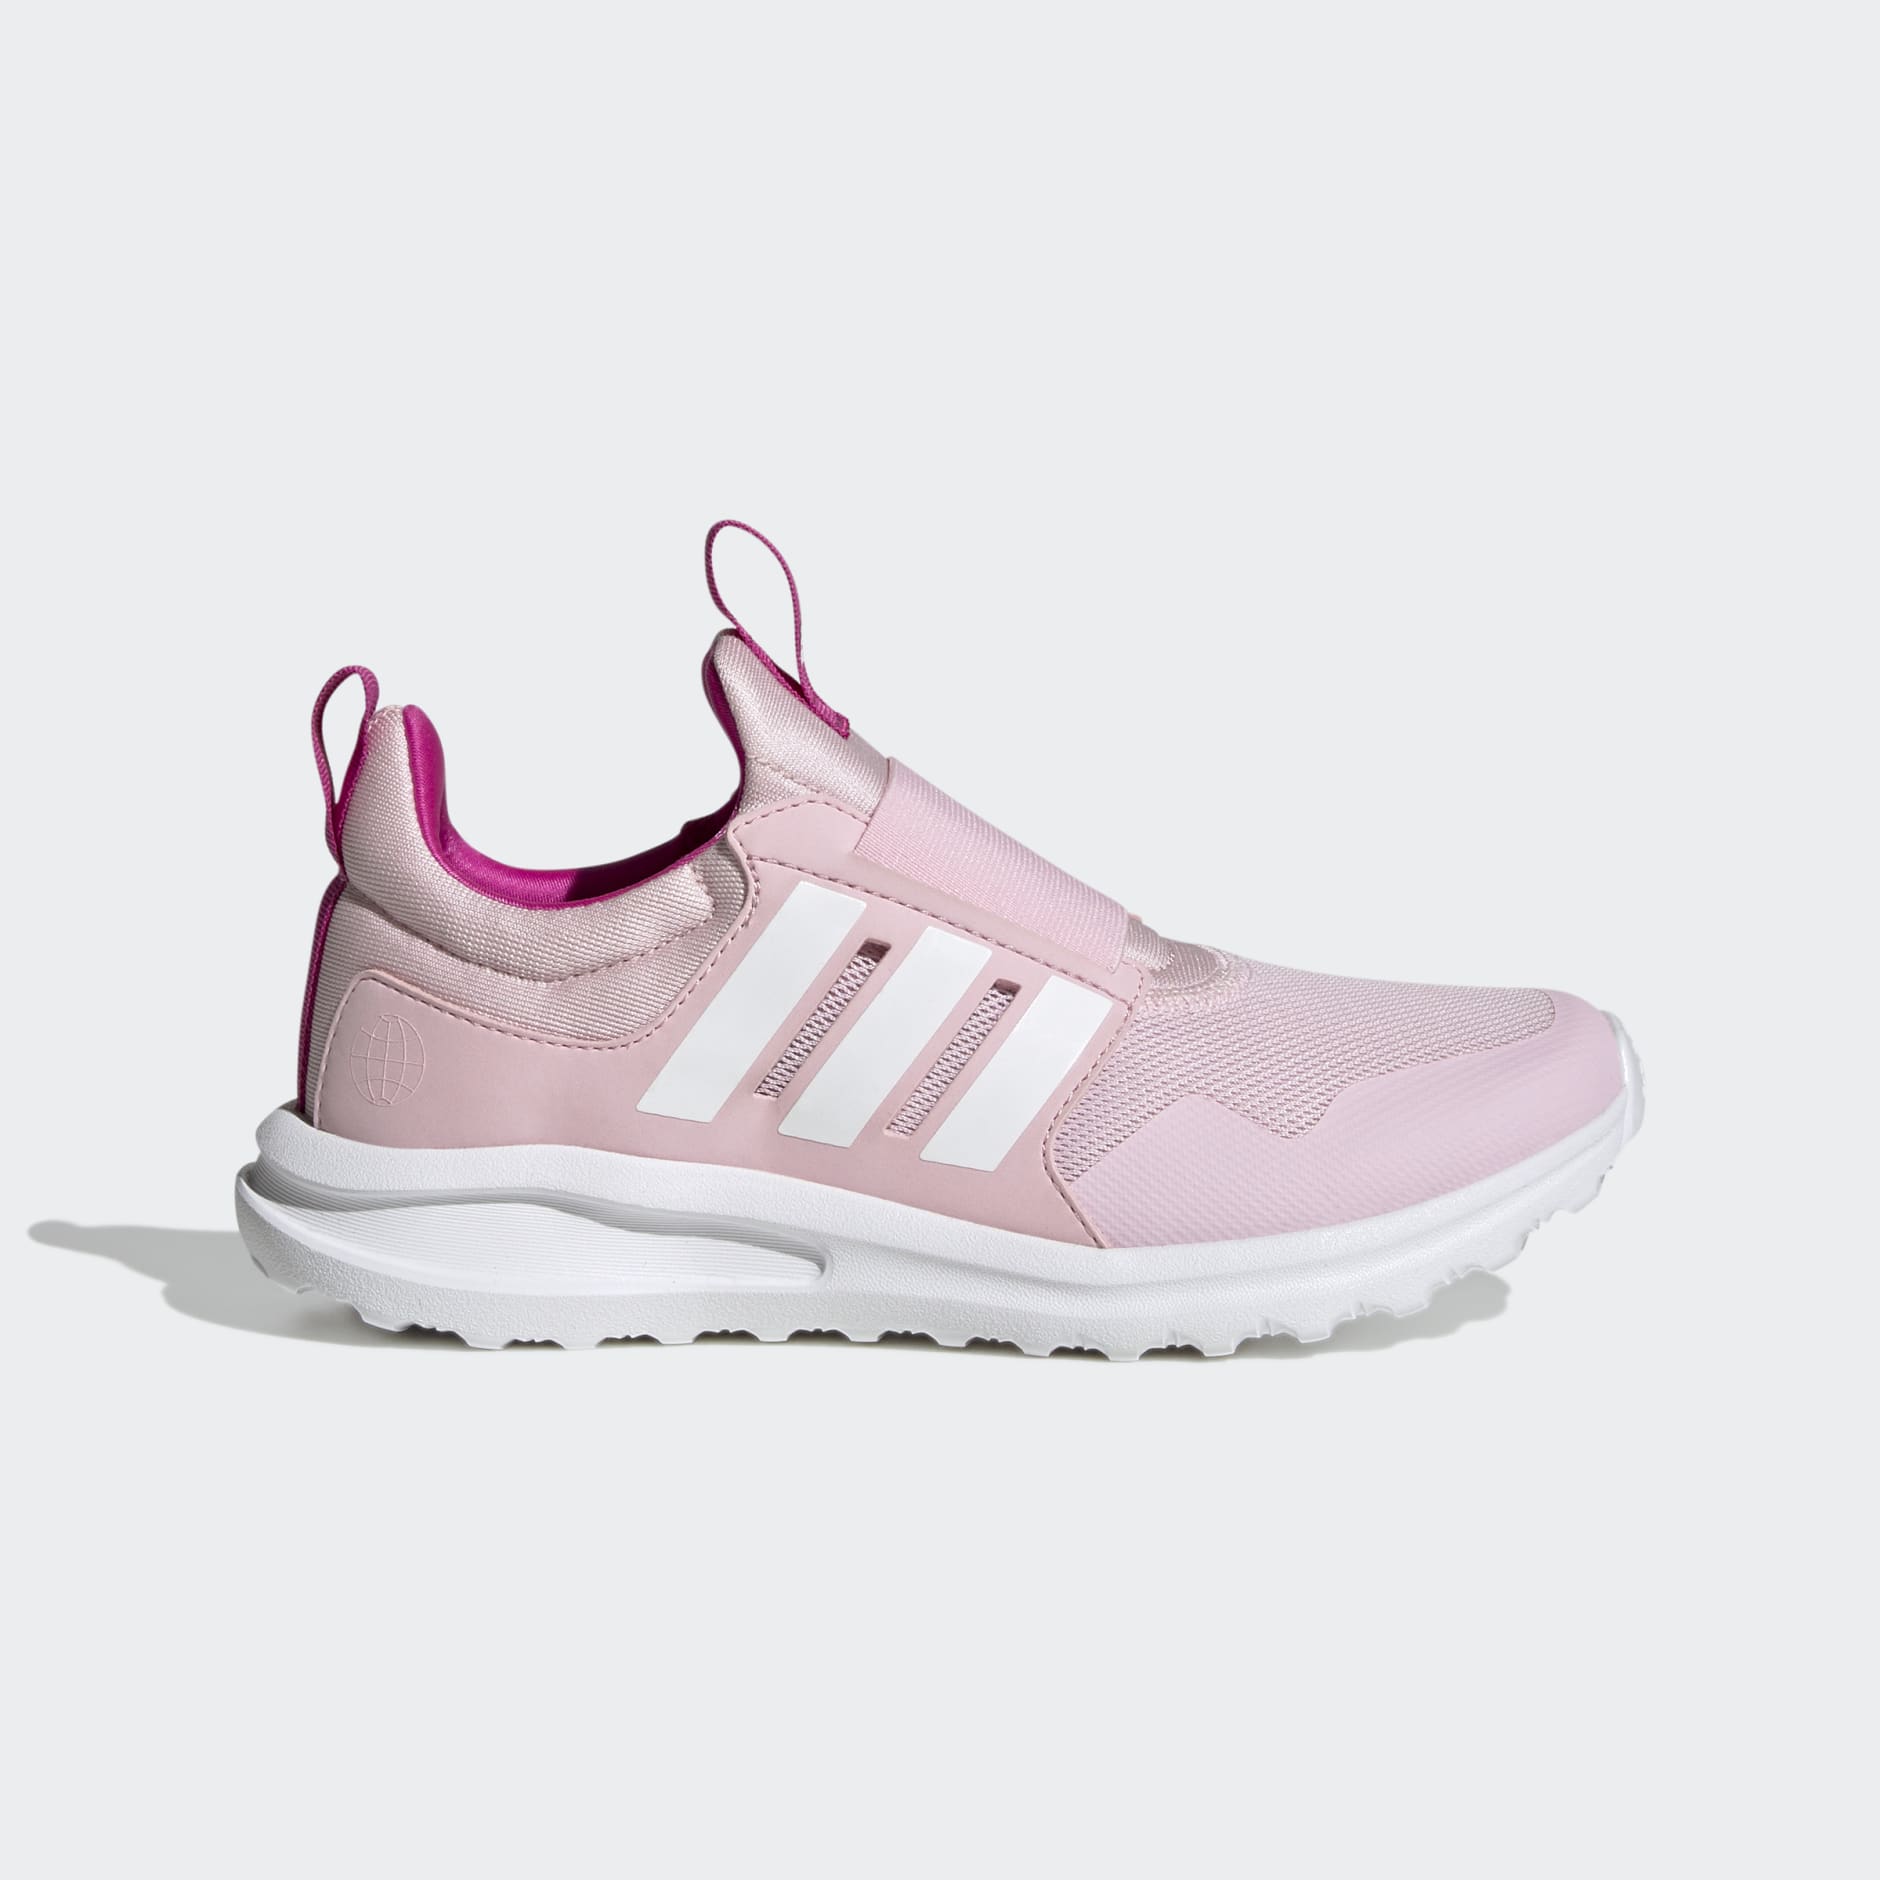 Kids Shoes - Activeride 2.0 Sport Running Slip-On Shoes - Pink | adidas ...